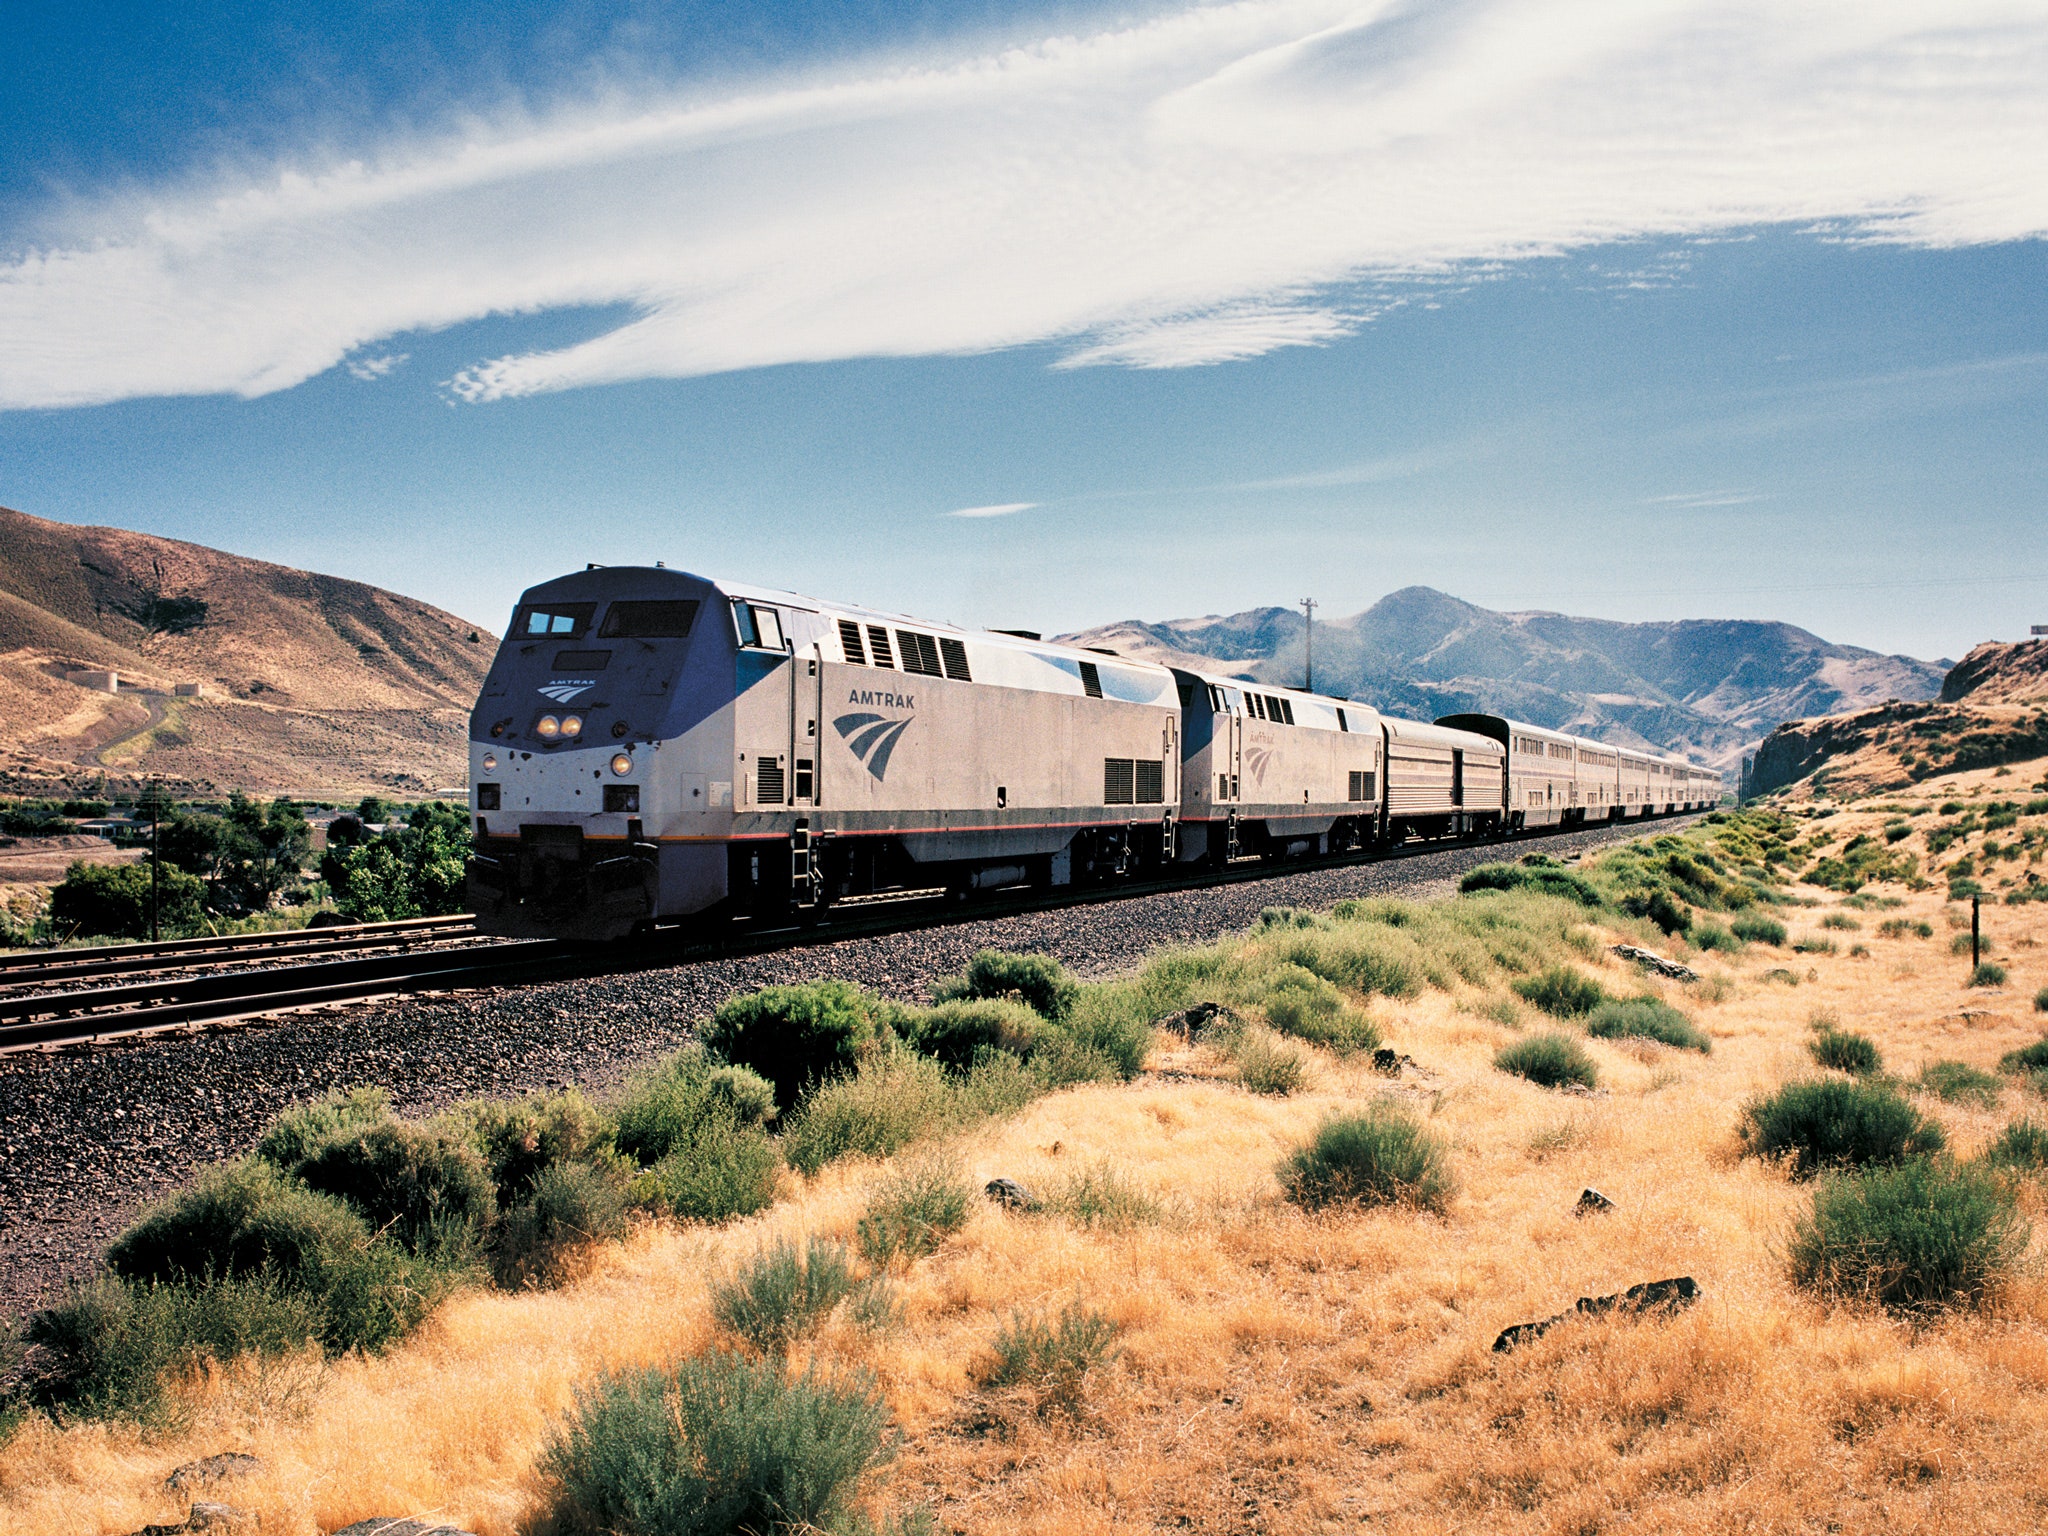 <p>Though the <a href="https://www.amtrak.com/california-zephyr-train">California Zephyr</a> runs from Chicago to <a href="http://www.cntraveler.com/destinations/san-francisco?mbid=synd_msn_rss&utm_source=msn&utm_medium=syndication">San Francisco</a> in a little more than 51 hours, it’s indisputably the western portion of the route—through Colorado, Utah, Nevada, and northern California—that deserves your attention. Snake through the Rocky Mountains, past the photogenic canyons of Colorado’s Western Slope, and enjoy an entire half-day trek through Sierra Nevada, complete with views of Donner Lake and the Truckee River.</p> <p><a href="https://www.amtrak.com/california-zephyr-train">Tickets from $141</a></p><p>Sign up to receive the latest news, expert tips, and inspiration on all things travel</p><a href="https://www.cntraveler.com/newsletter/the-daily?sourceCode=msnsend">Inspire Me</a>